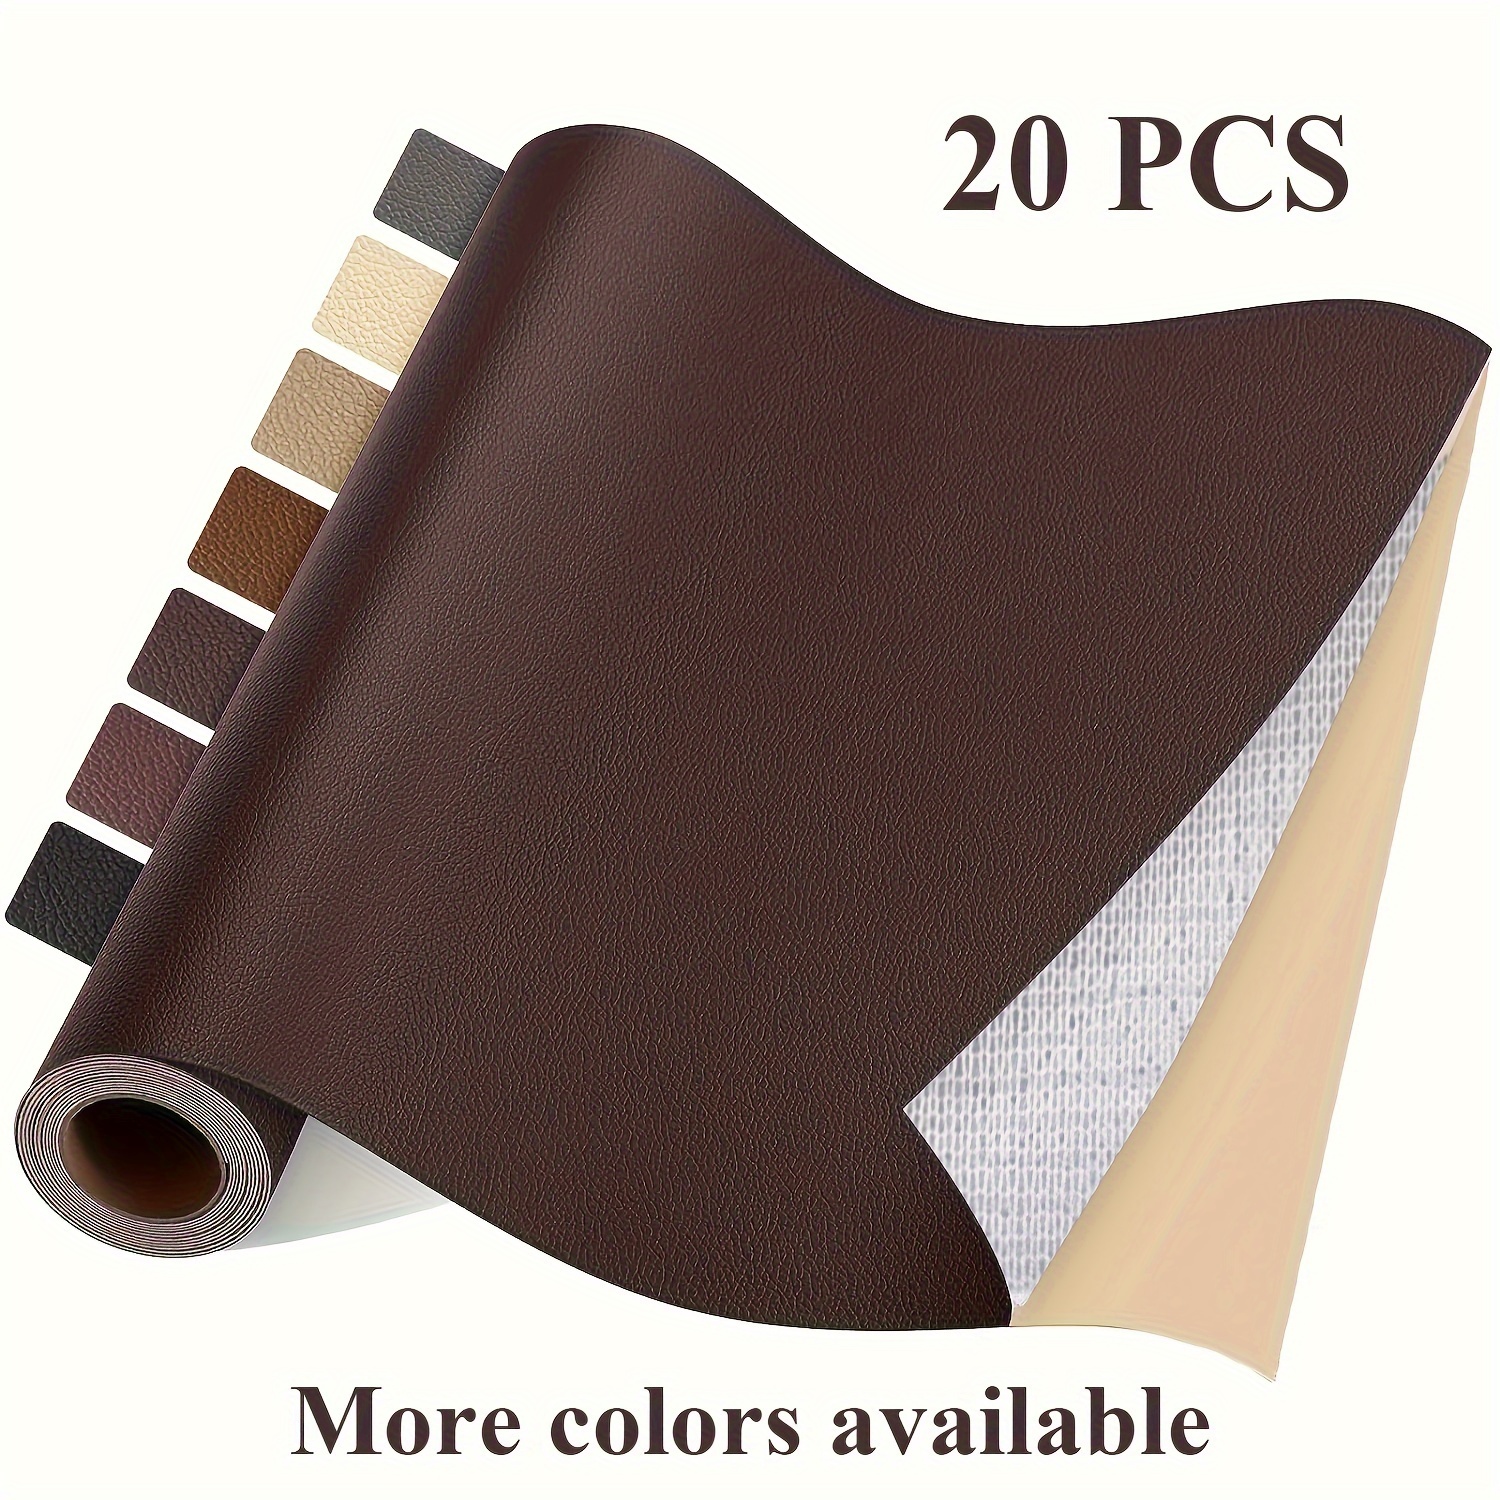 ONINE Leather Tape 3x60 inch Self-Adhesive Leather Repair Patch for Sofas, Couch, Furniture, Drivers Seat(Dark Brown)